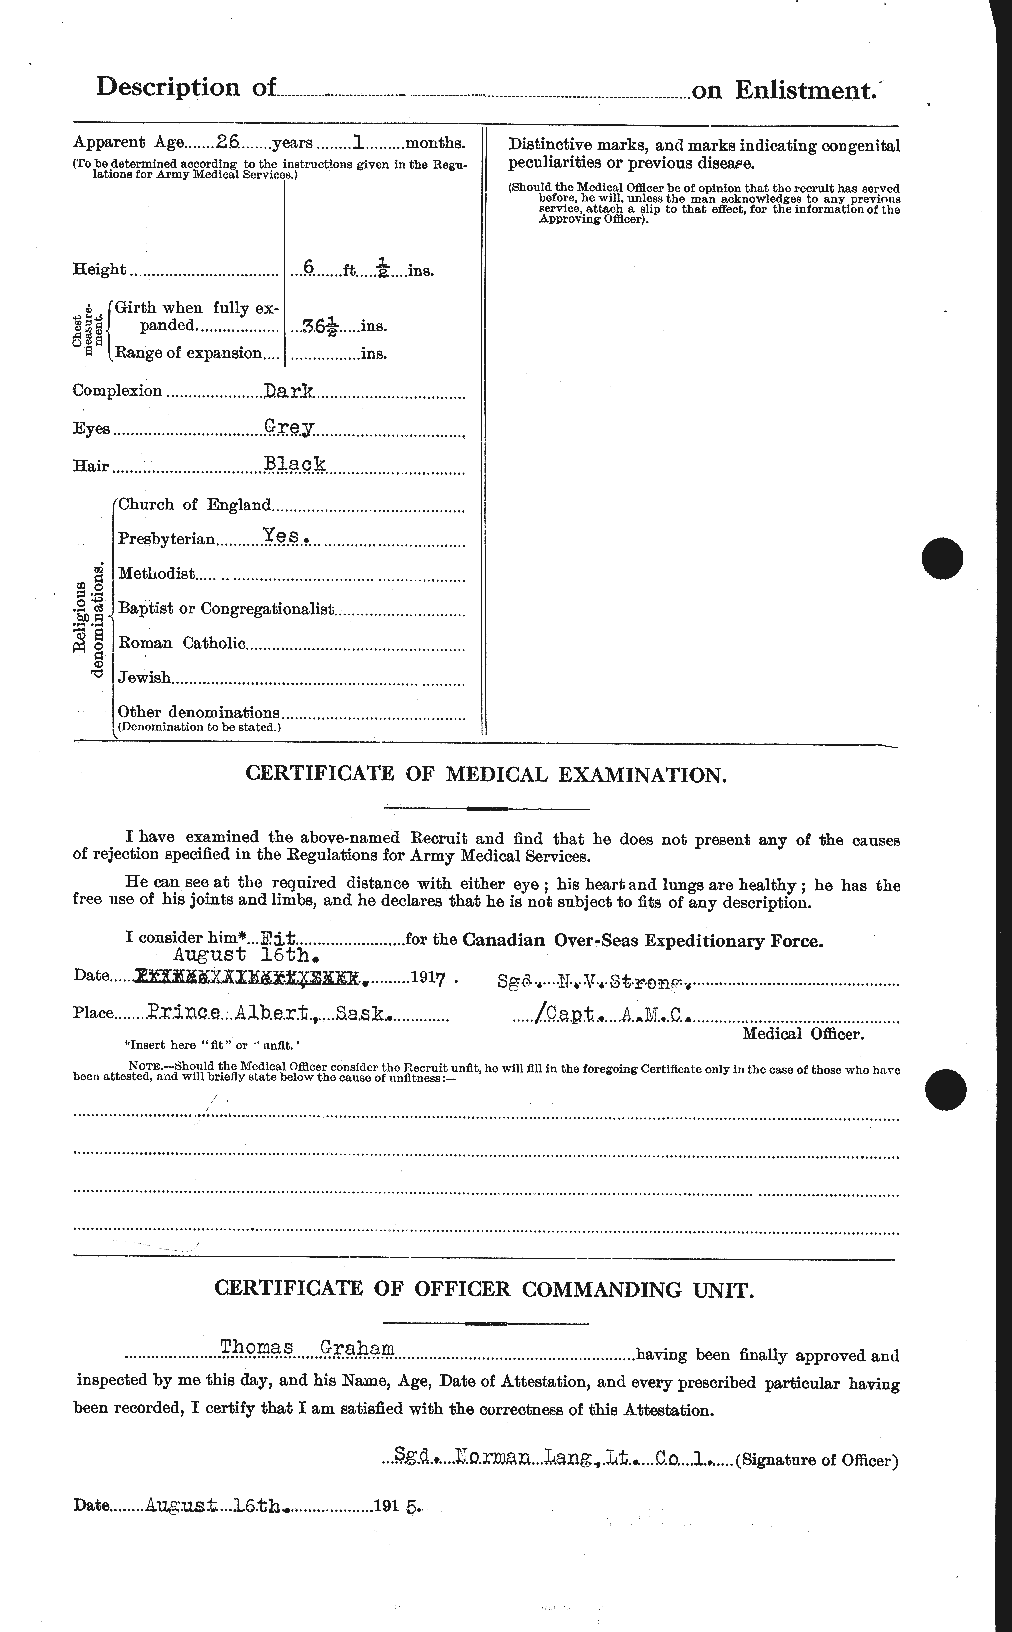 Personnel Records of the First World War - CEF 359484b